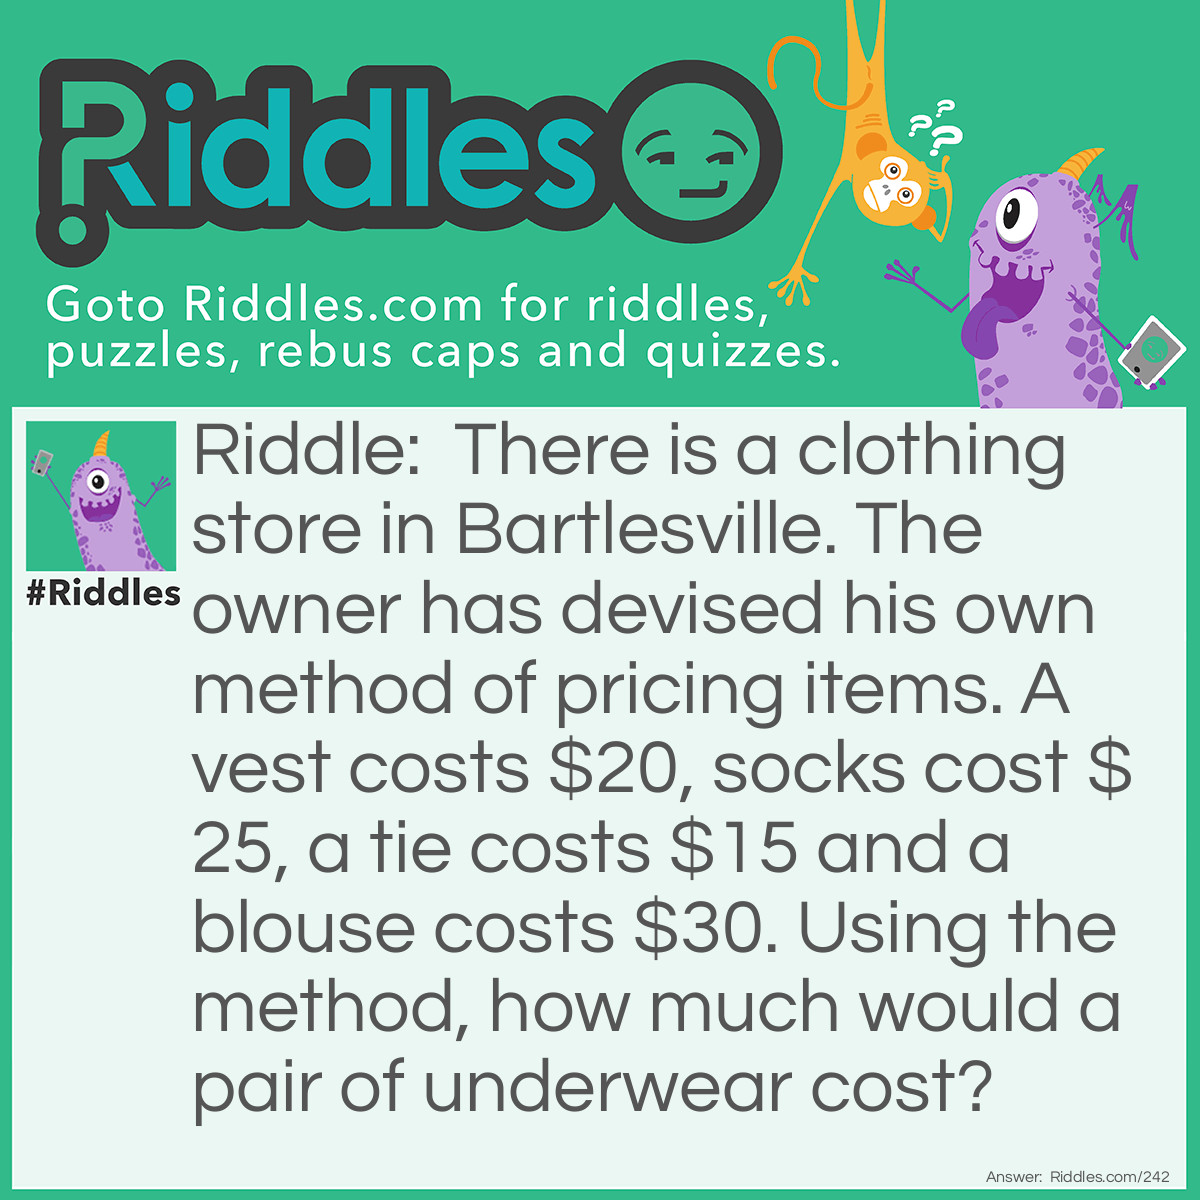 Riddle: There is a clothing store in Bartlesville. The owner has devised his own method of pricing items. A vest costs $20, socks cost $25, a tie costs $15 and a blouse costs $30. Using the method, how much would a pair of underwear cost? Answer: $45. The pricing method consists of charging $5 for each letter required to spell the item.